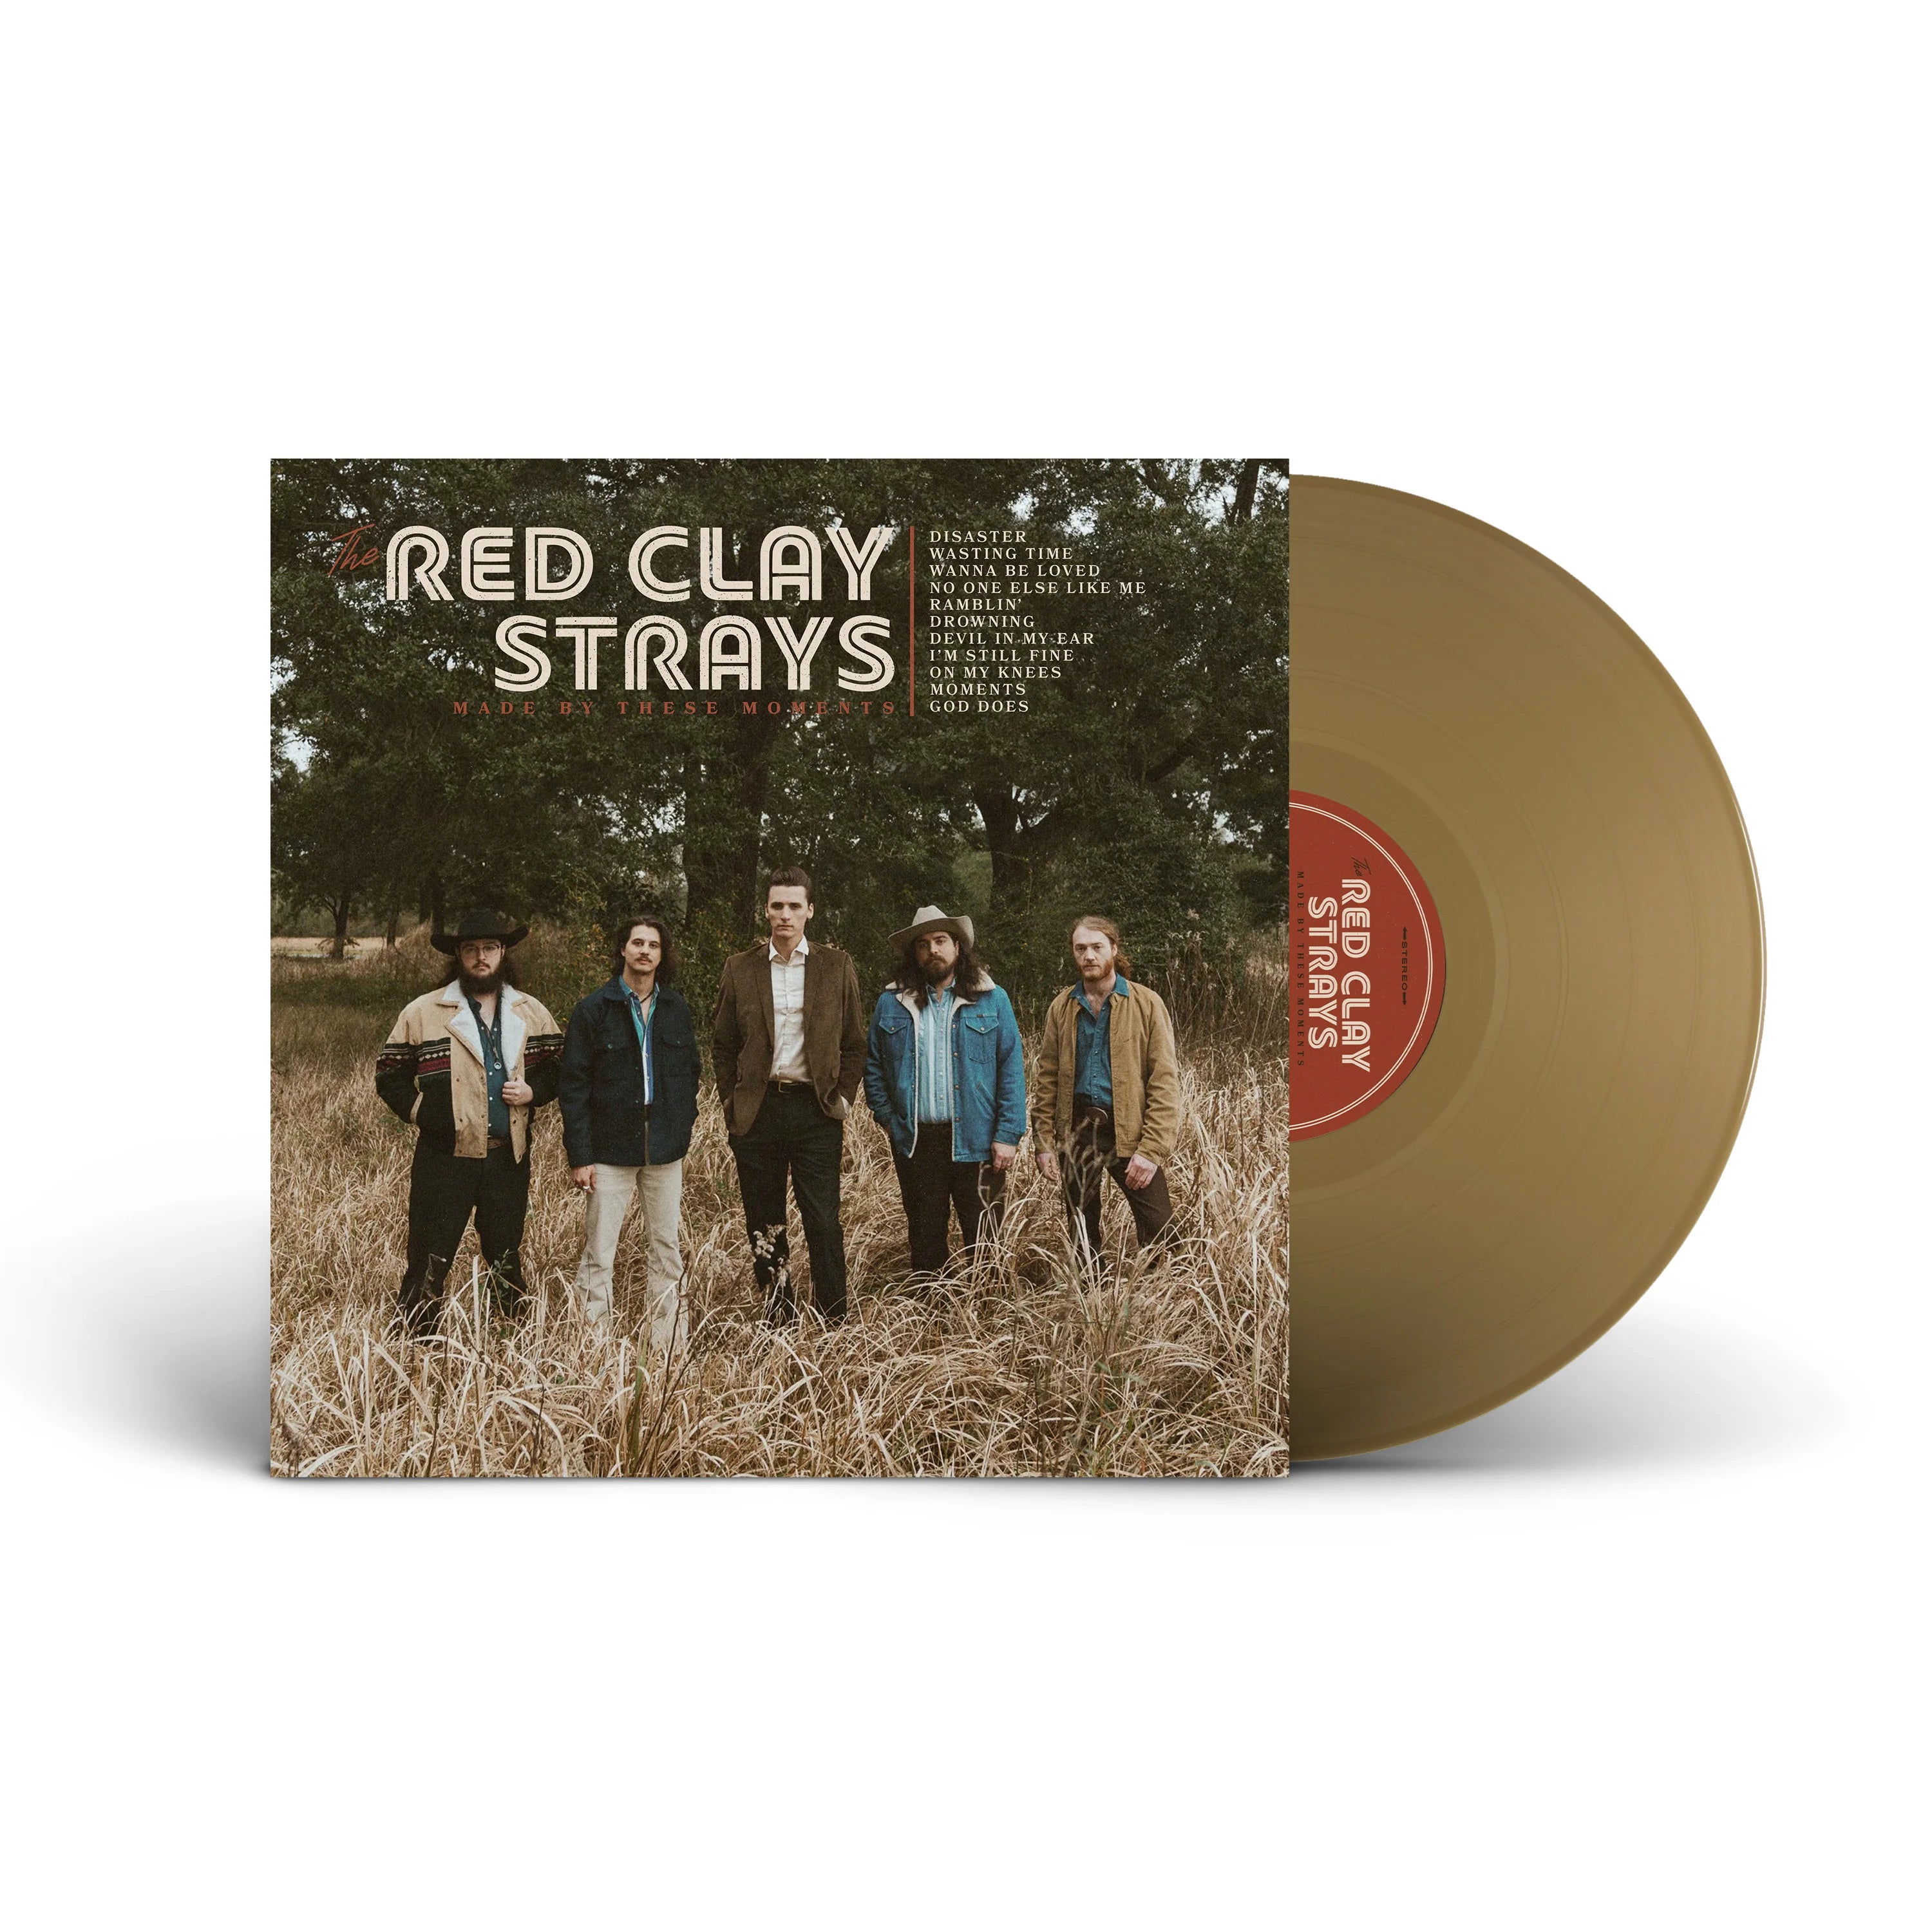 The Red Clay Strays - Made By These Moments: Opaque Gold Vinyl LP